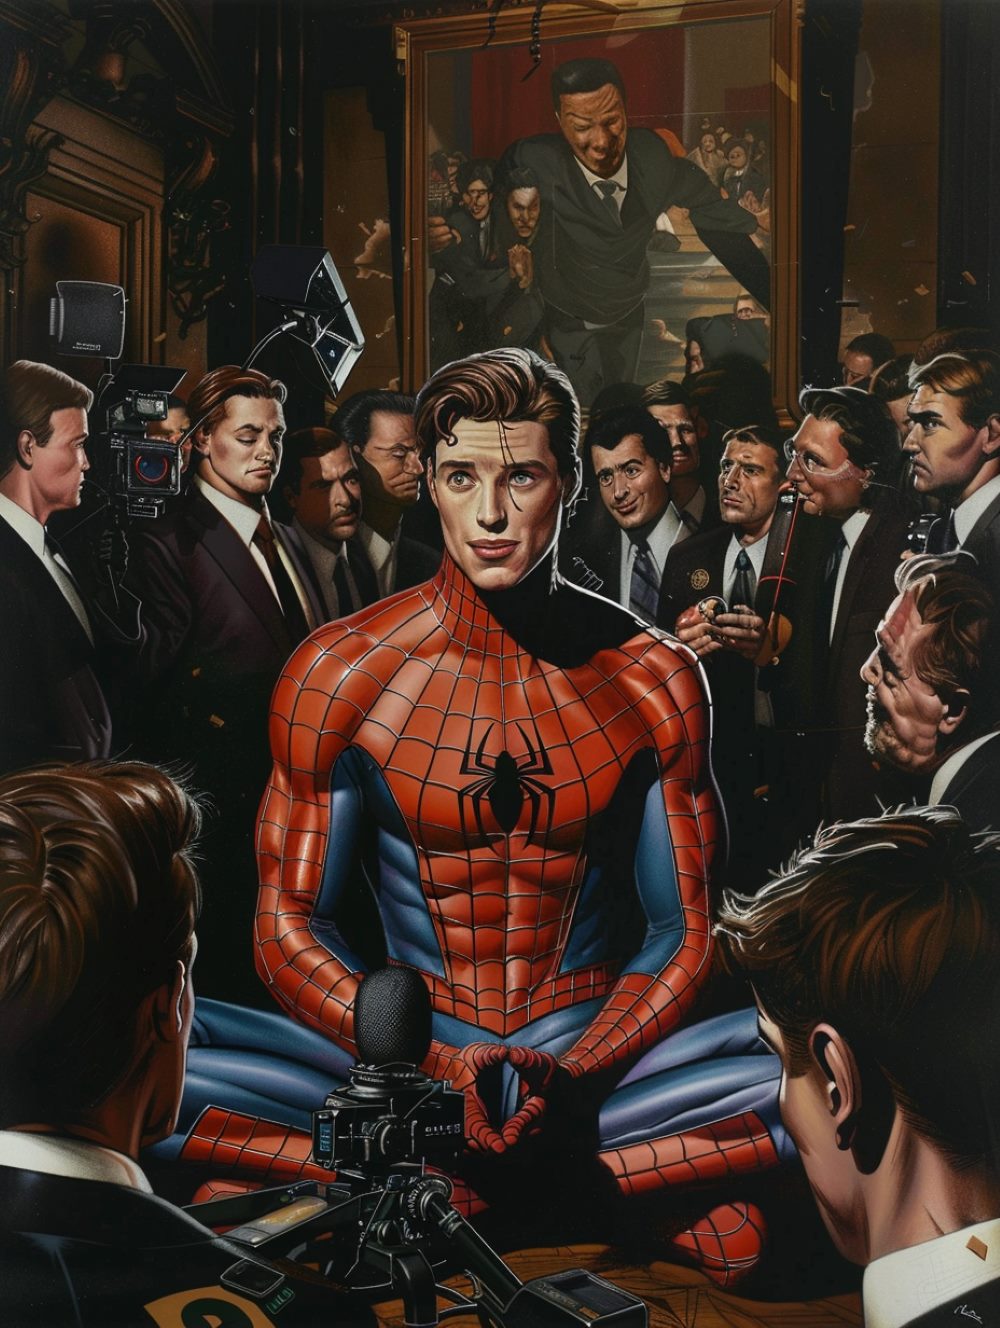 Spider-man sitting in a conference hall and revealing his face